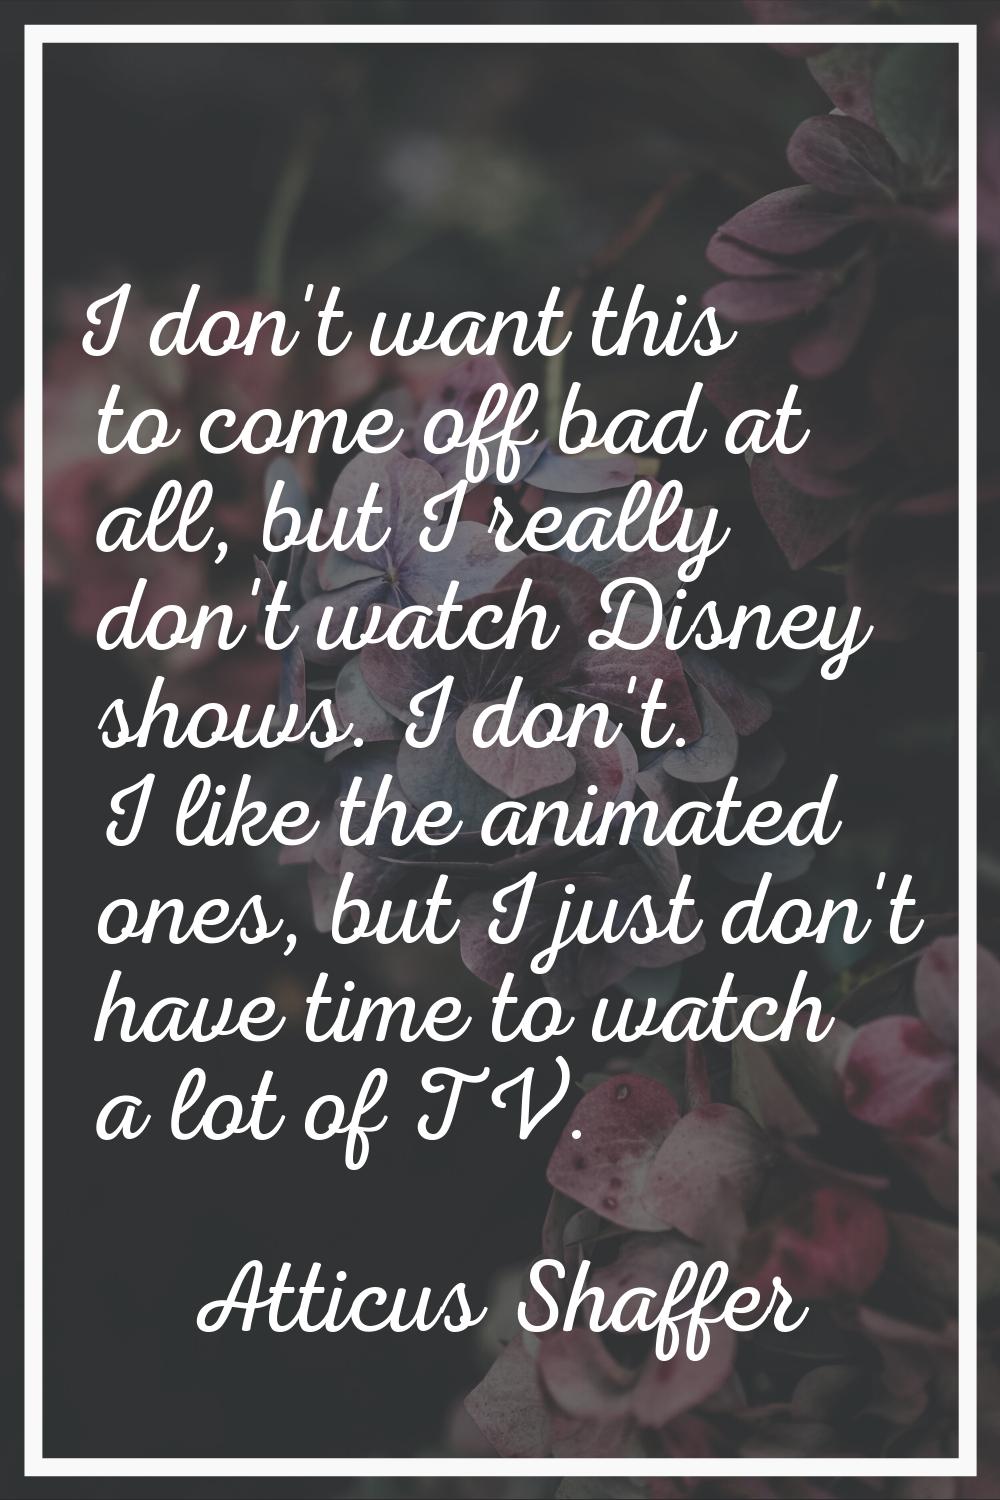 I don't want this to come off bad at all, but I really don't watch Disney shows. I don't. I like th